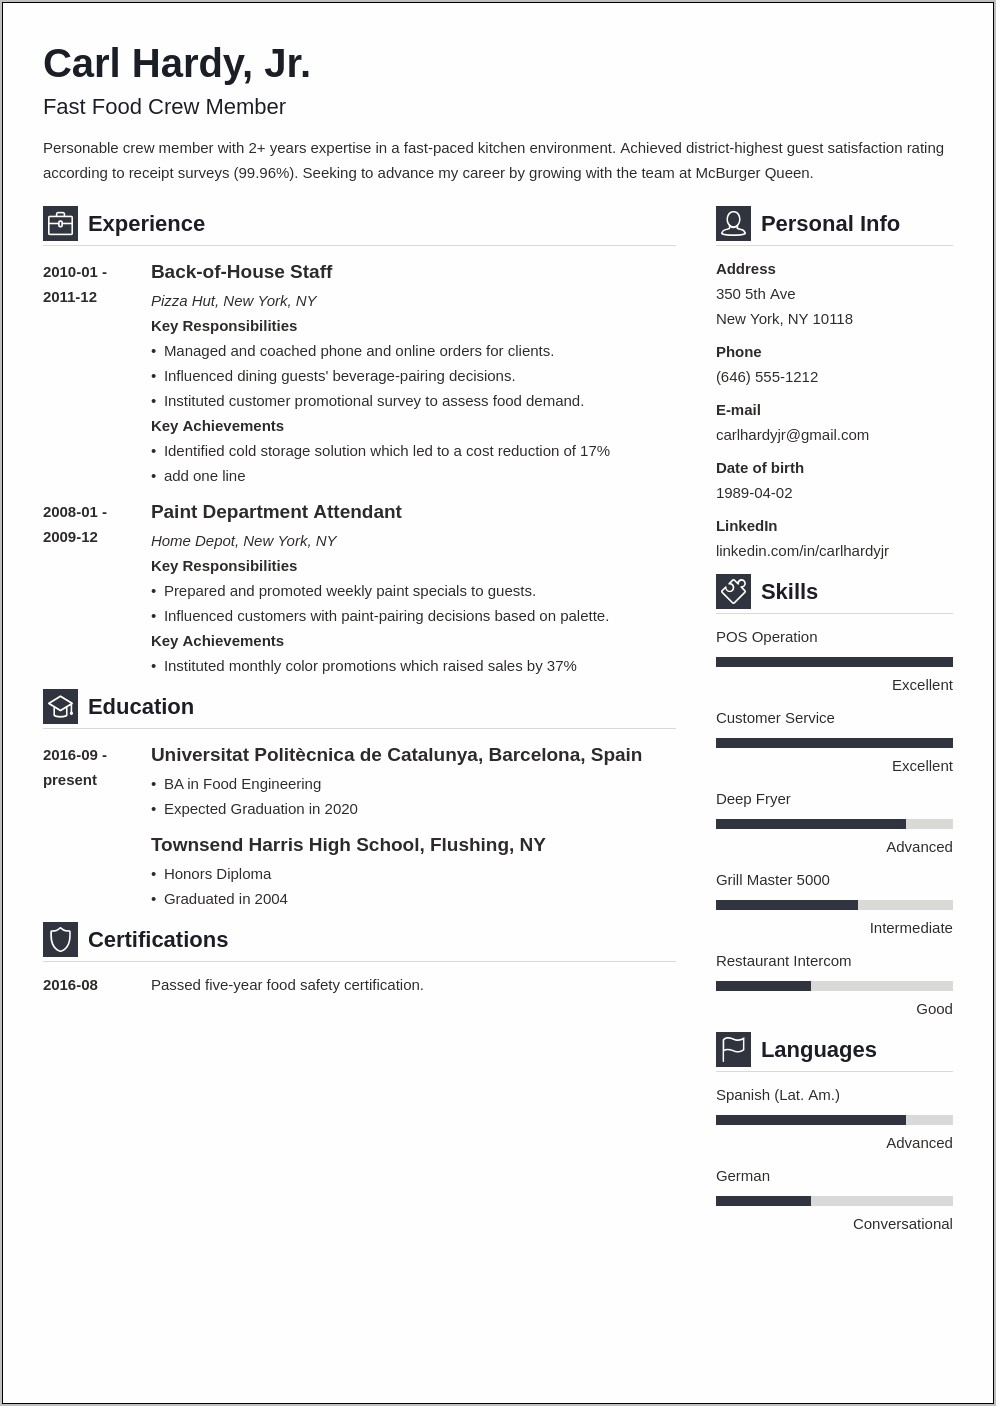 Sample Resume Format For Fast Food Crew